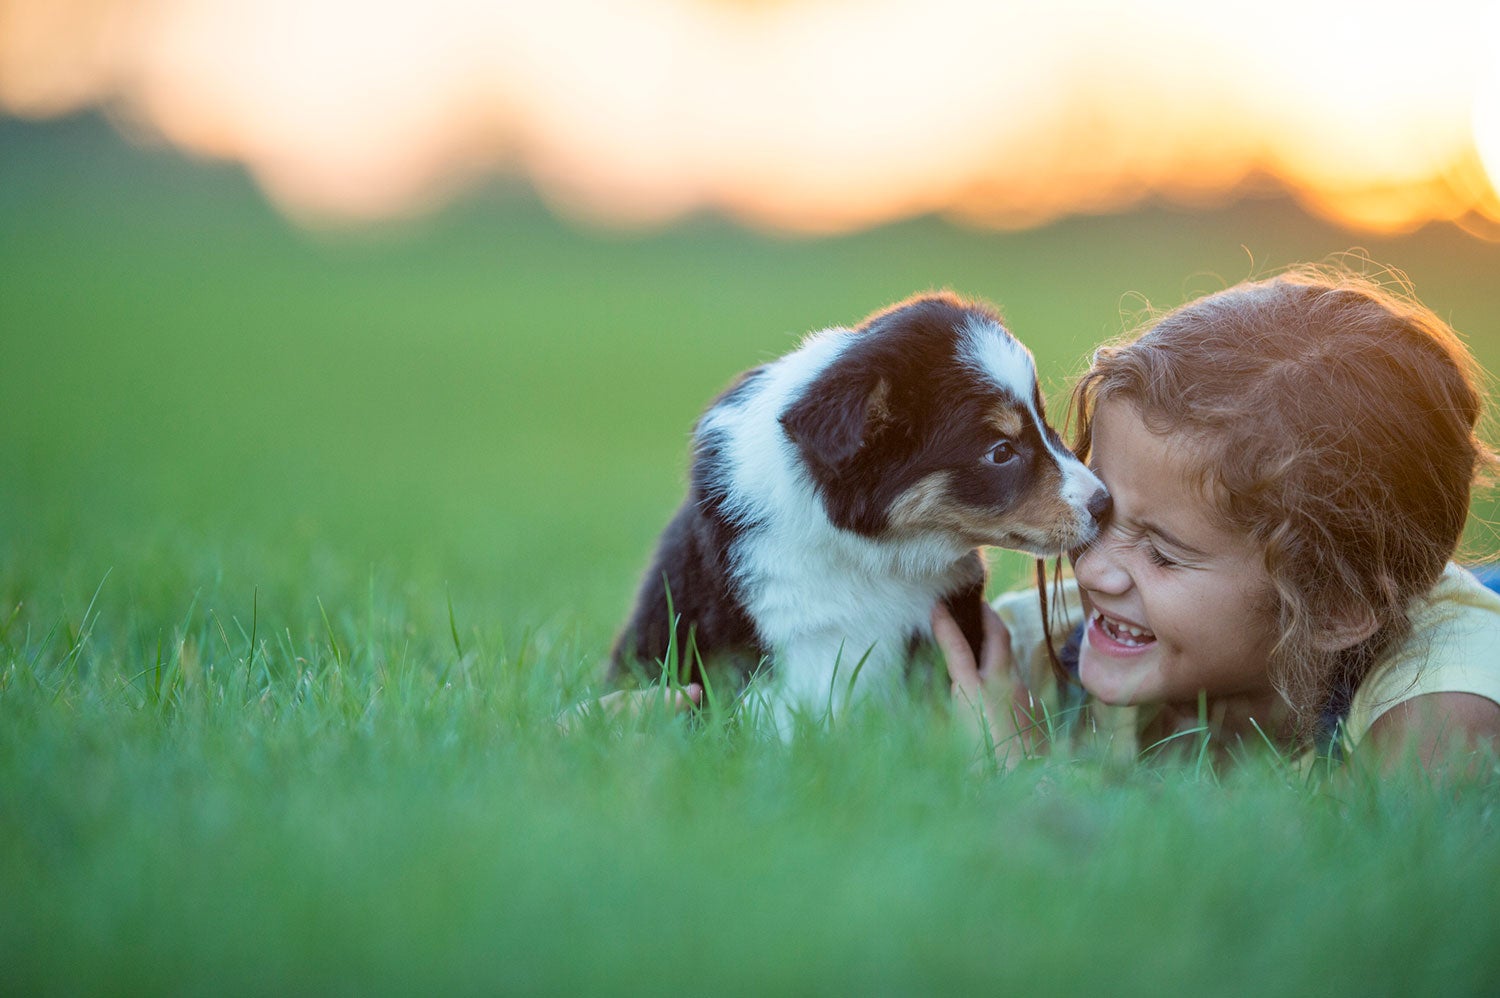 puppy-grass-little-girl-GettyImages-615492472